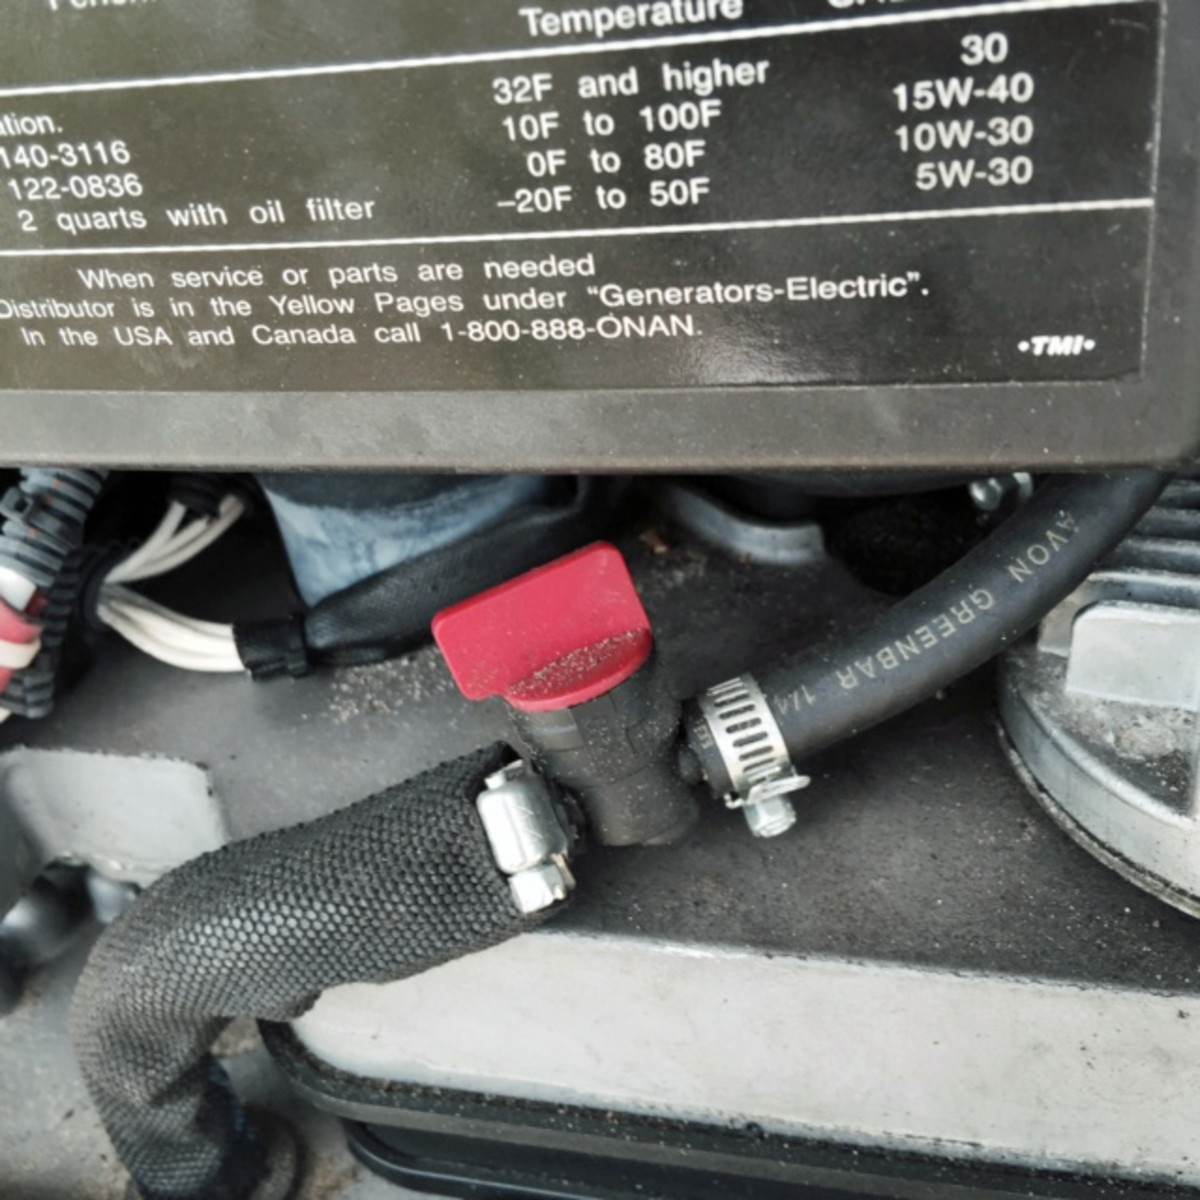 View of the fuel cut-off valve on an Onan 5500 gas RV generator